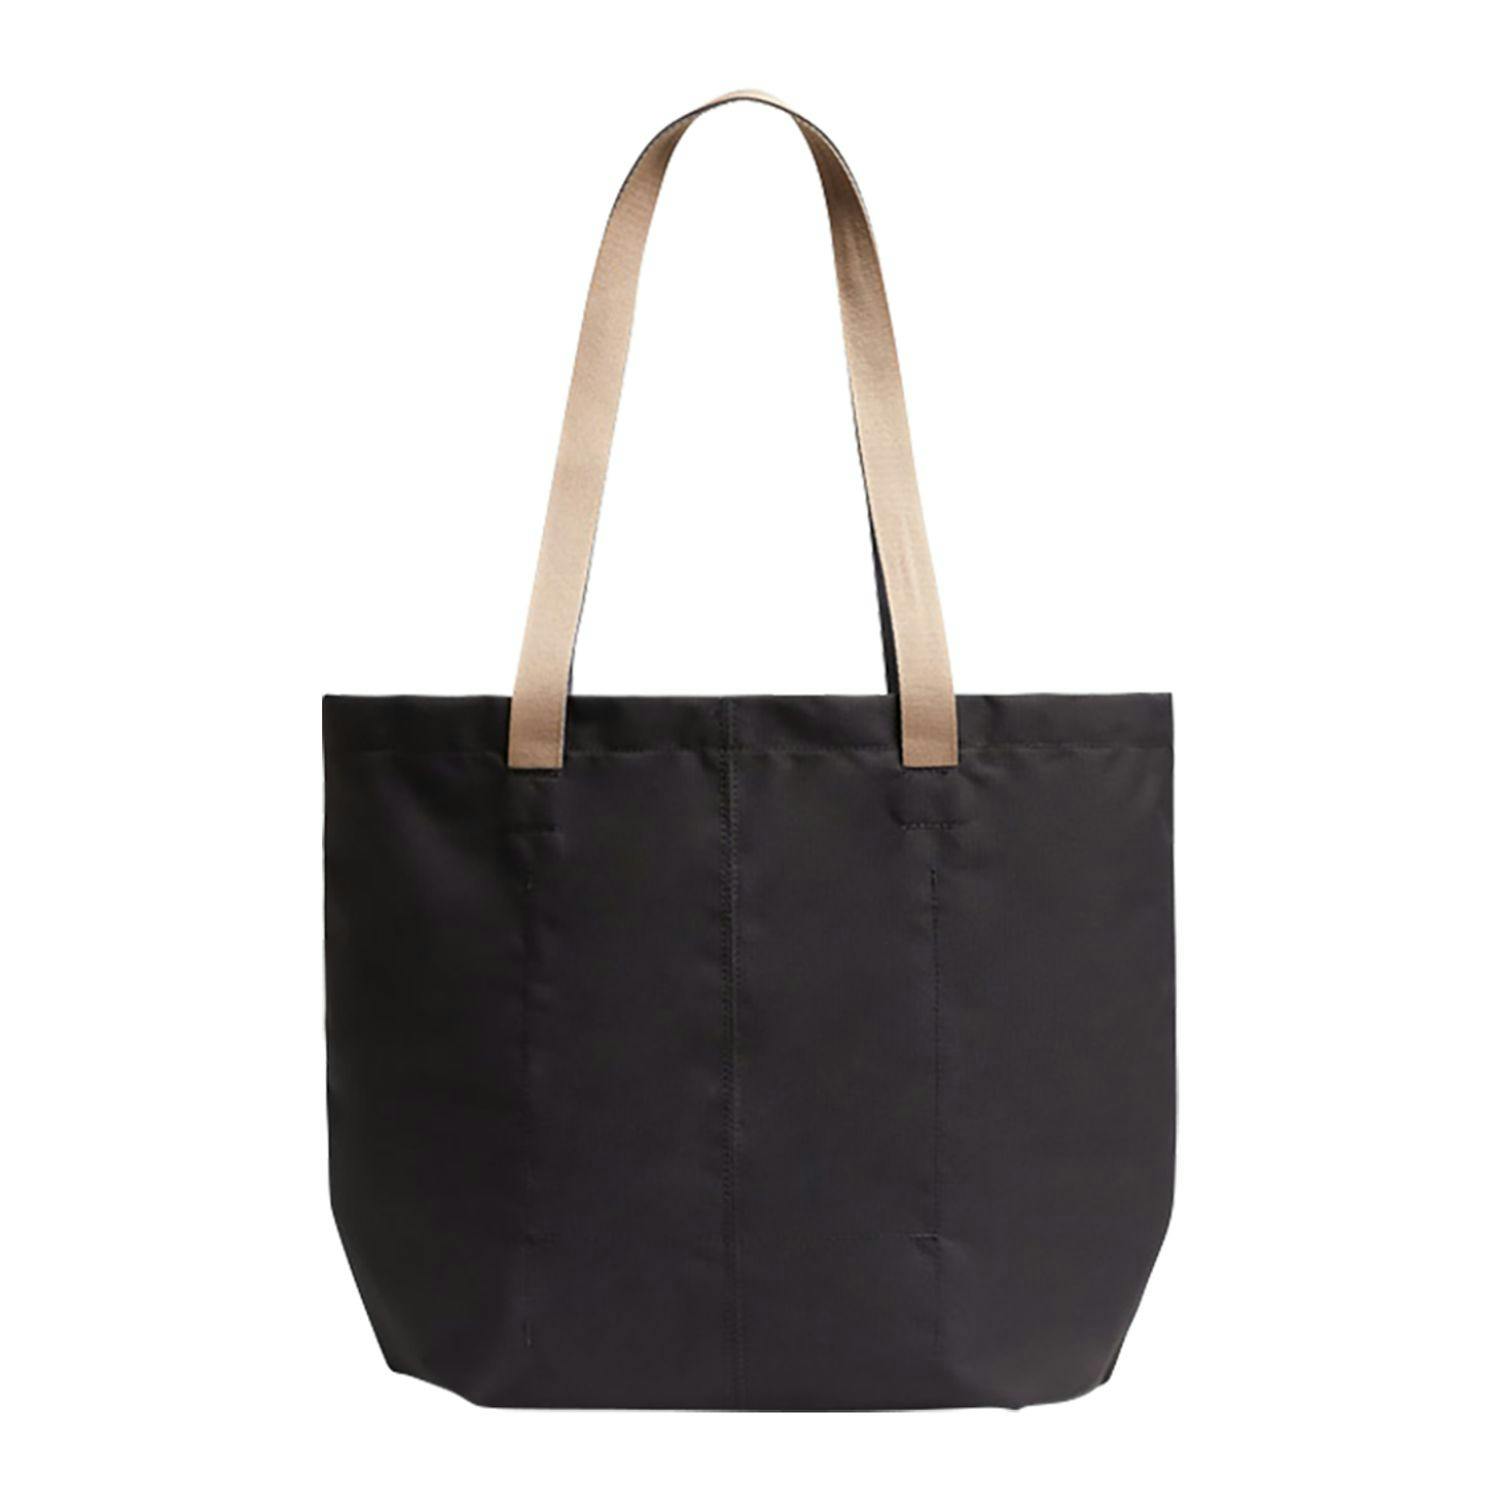 Bellroy Market Tote - additional Image 1